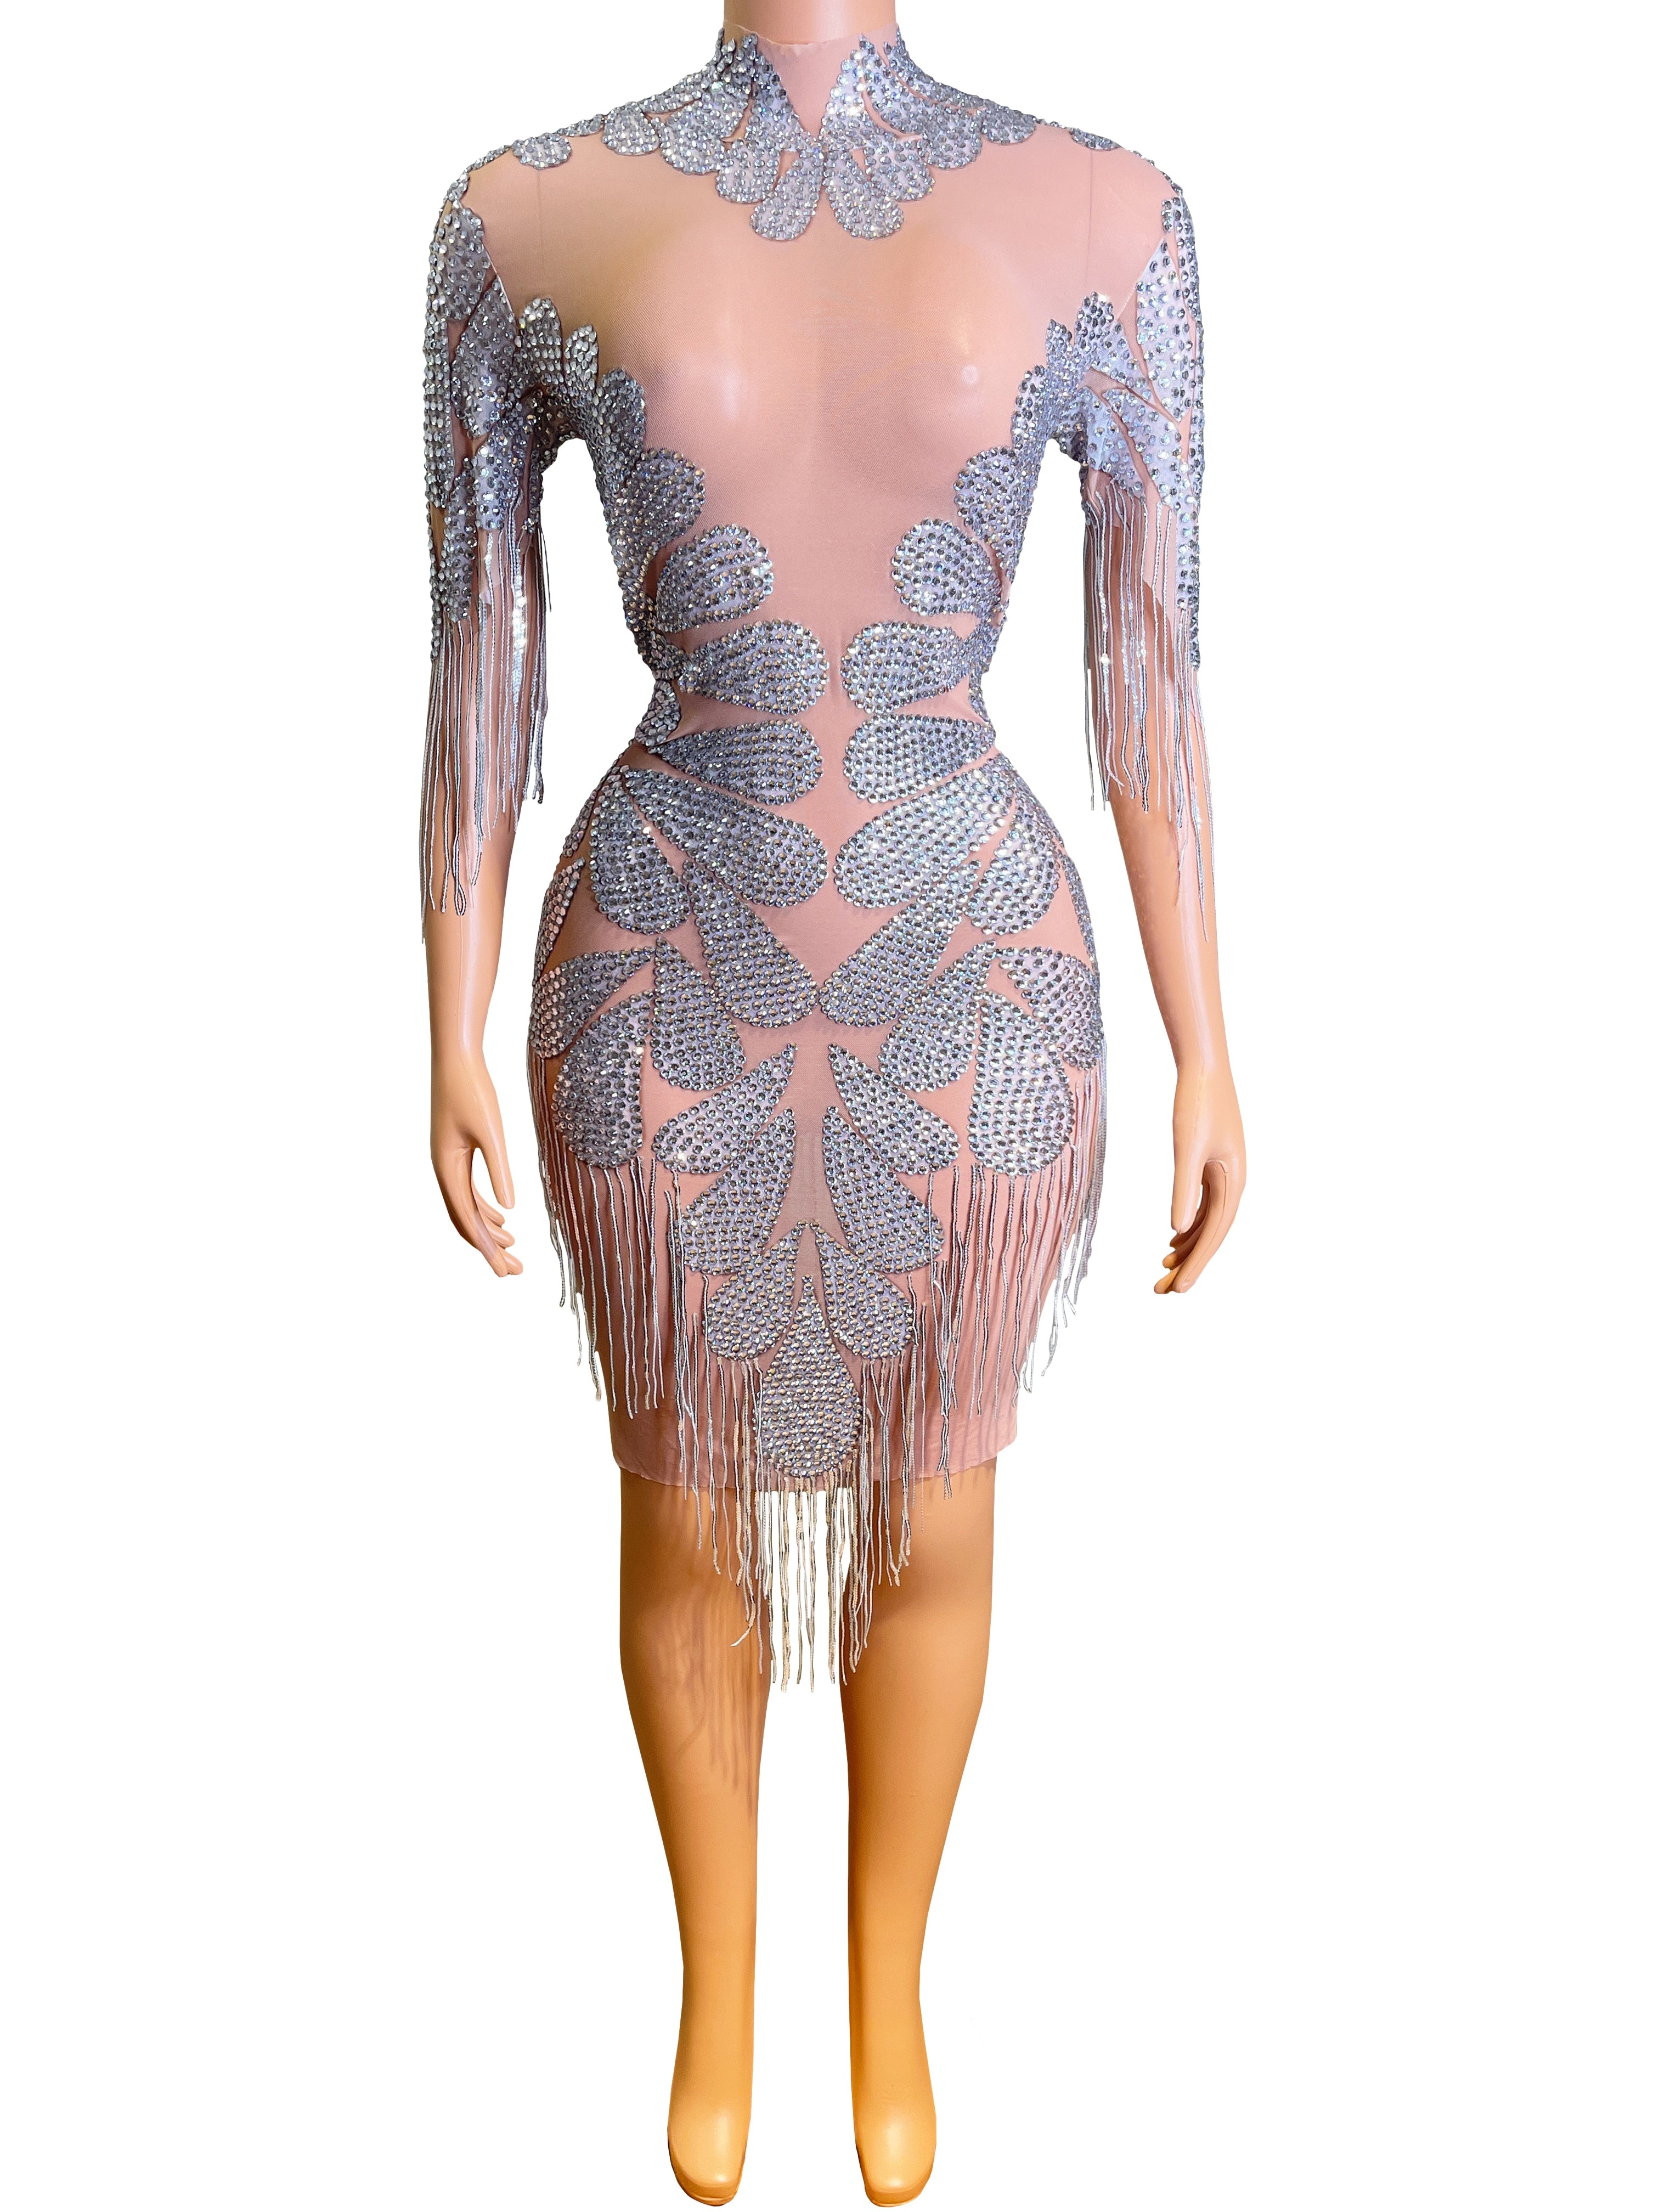 Silver Rhinestones Transparent Nude Stretch Fringes Dress Evening Birthday Celebrate Outfit Dance Performance Costume huaban